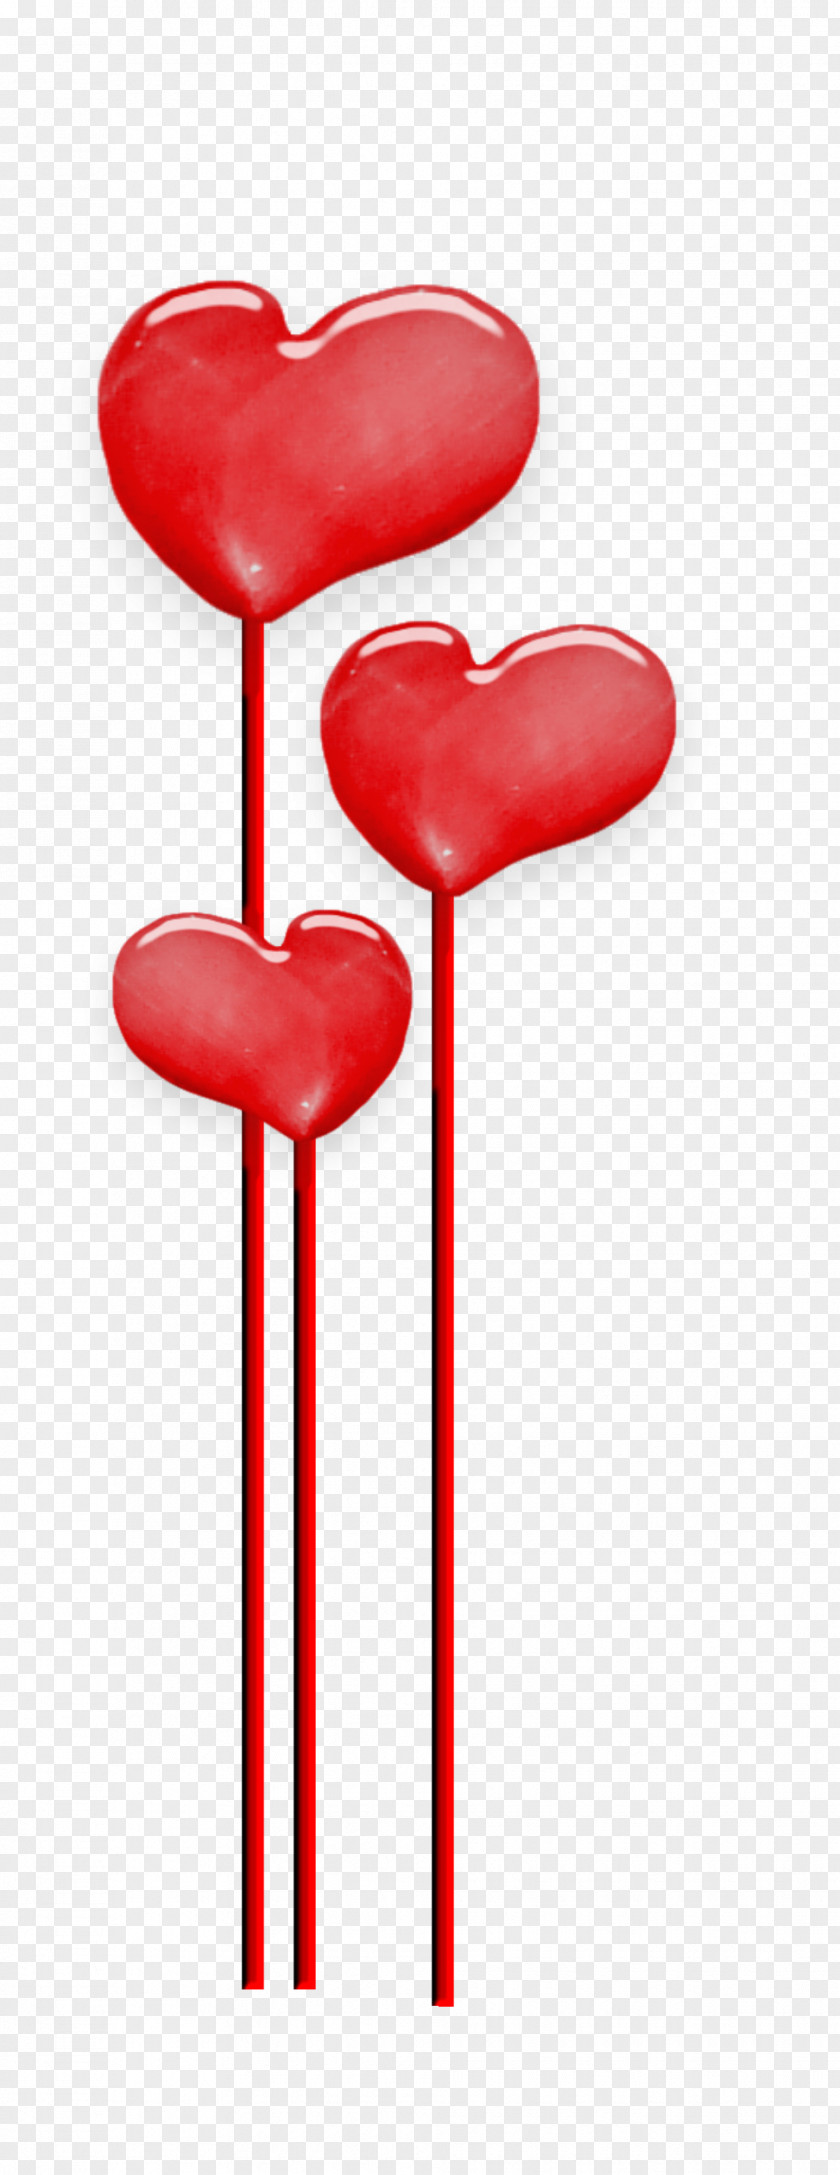 Heart Red Clip Art Image PNG